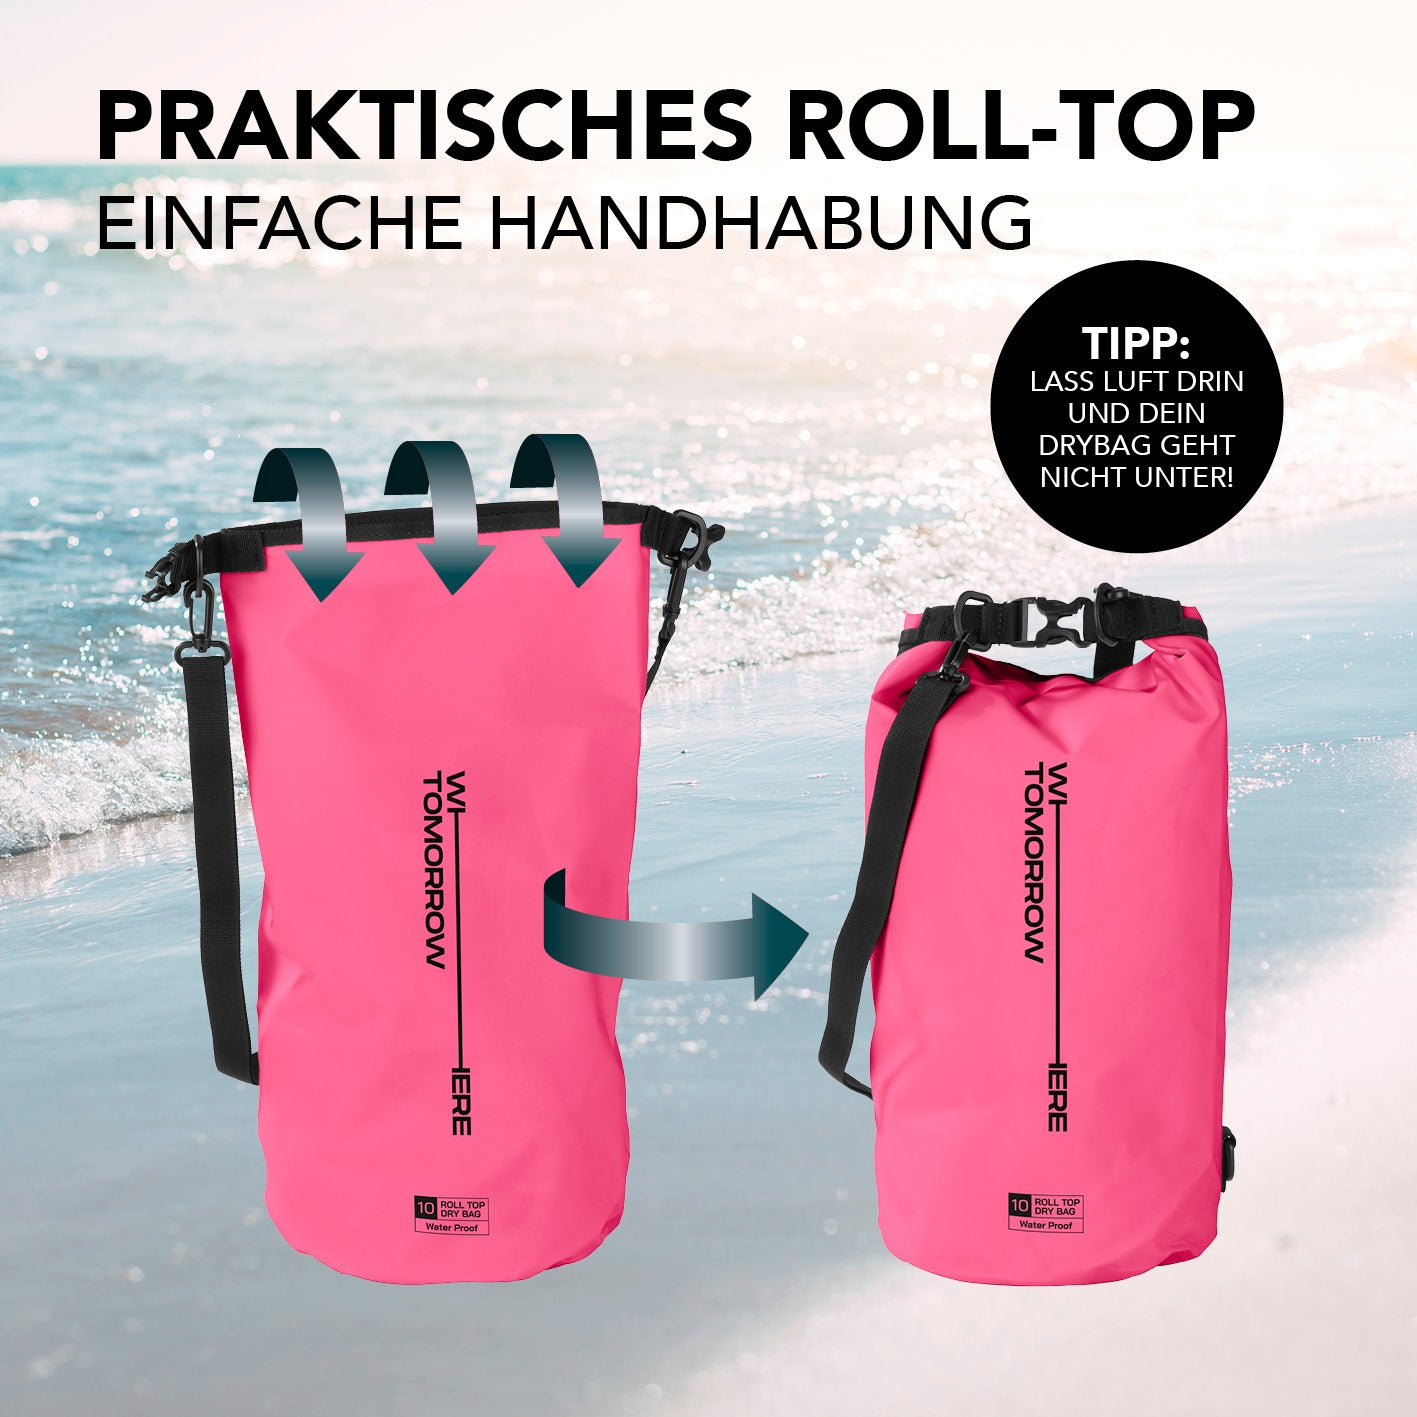 Dry Bag 10L - Style 02 - Pink